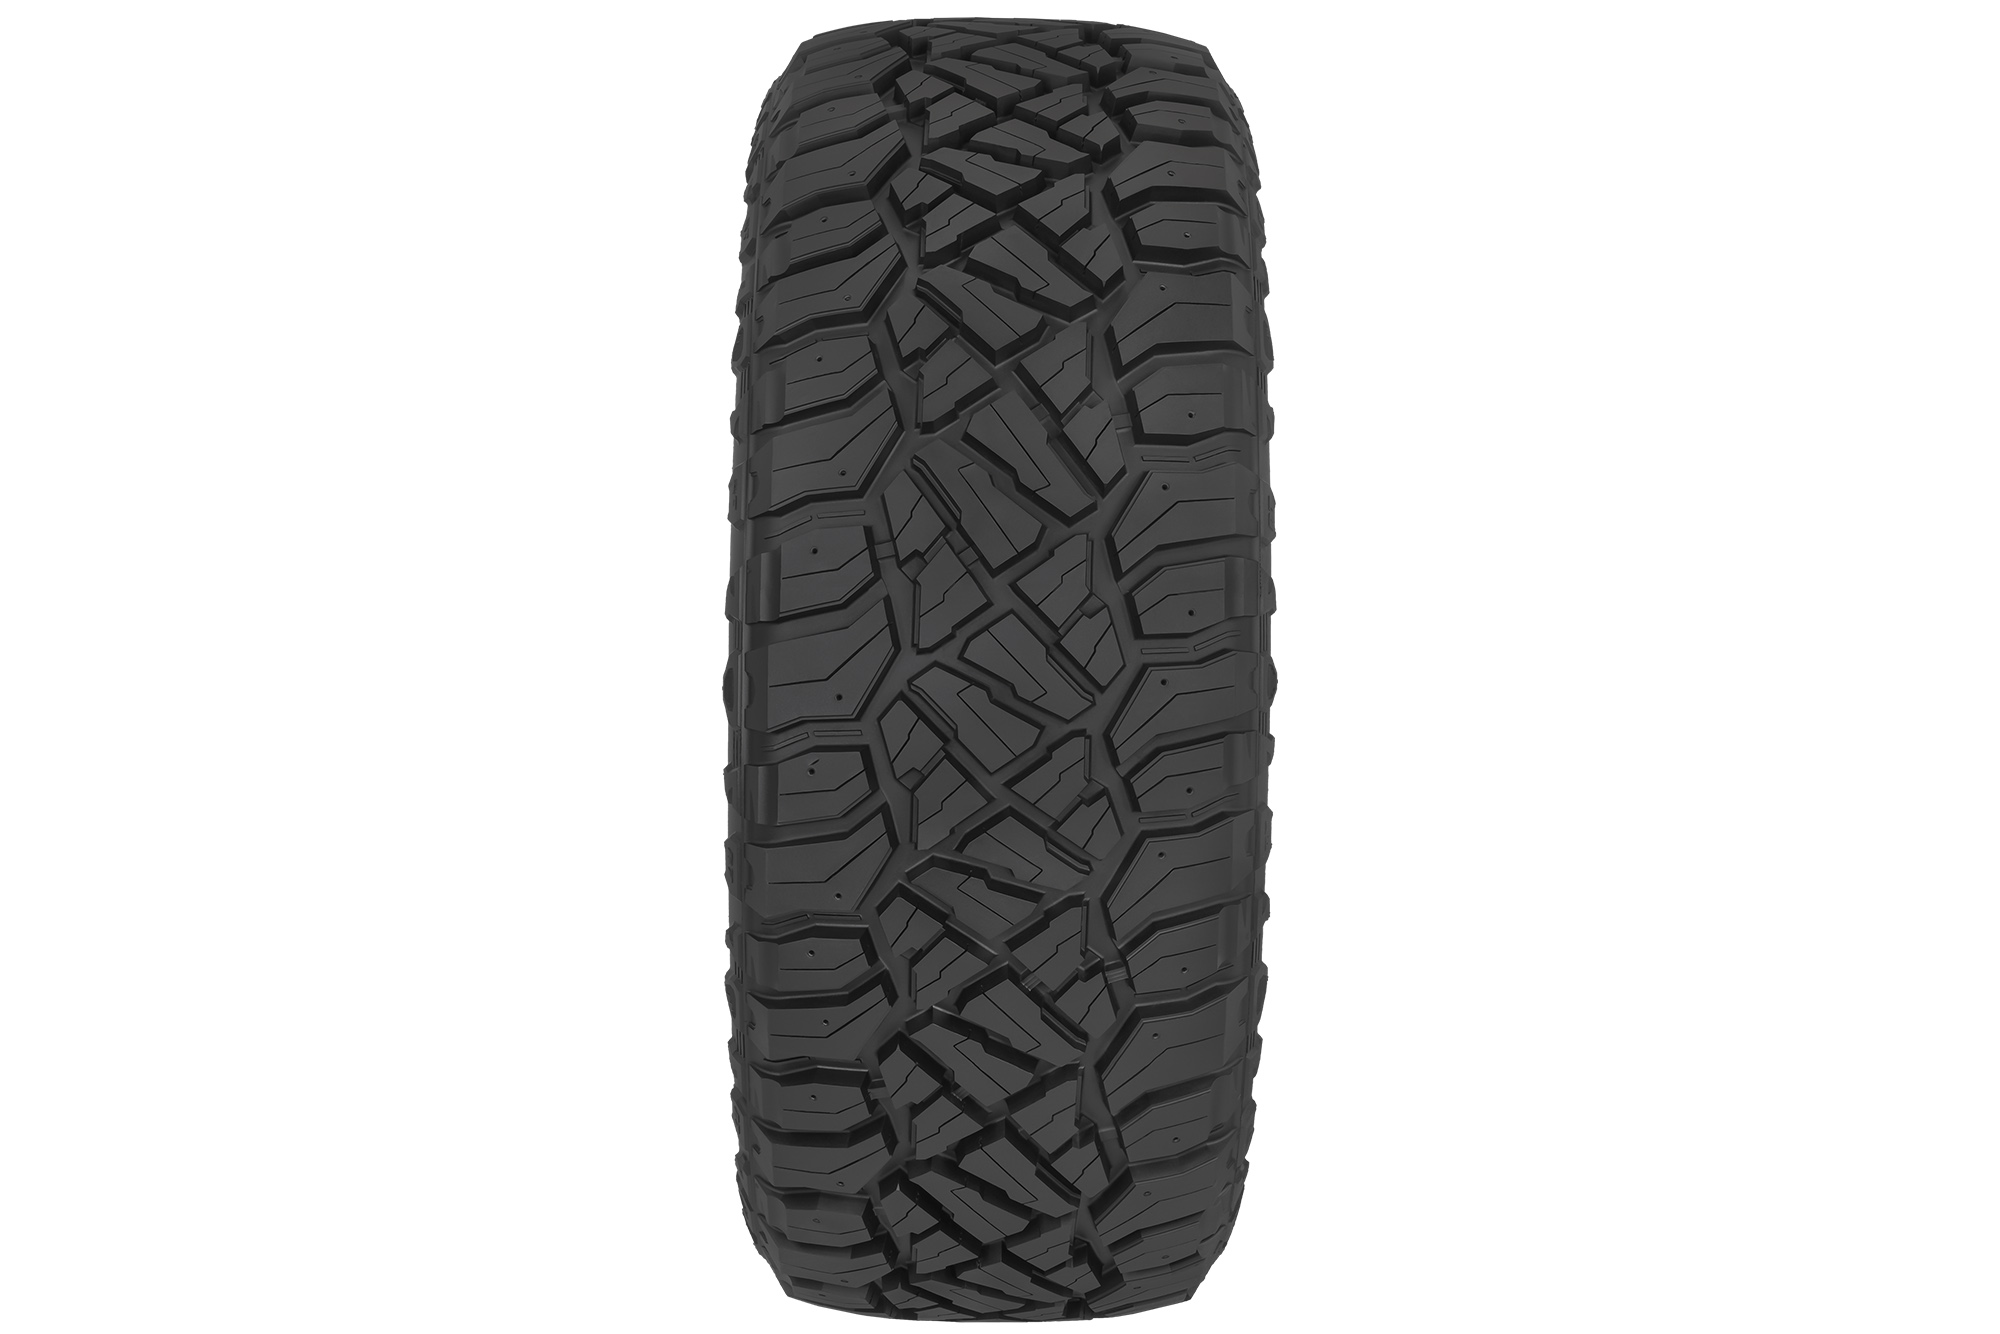 Rugged terrain tire stock photo shot from the side